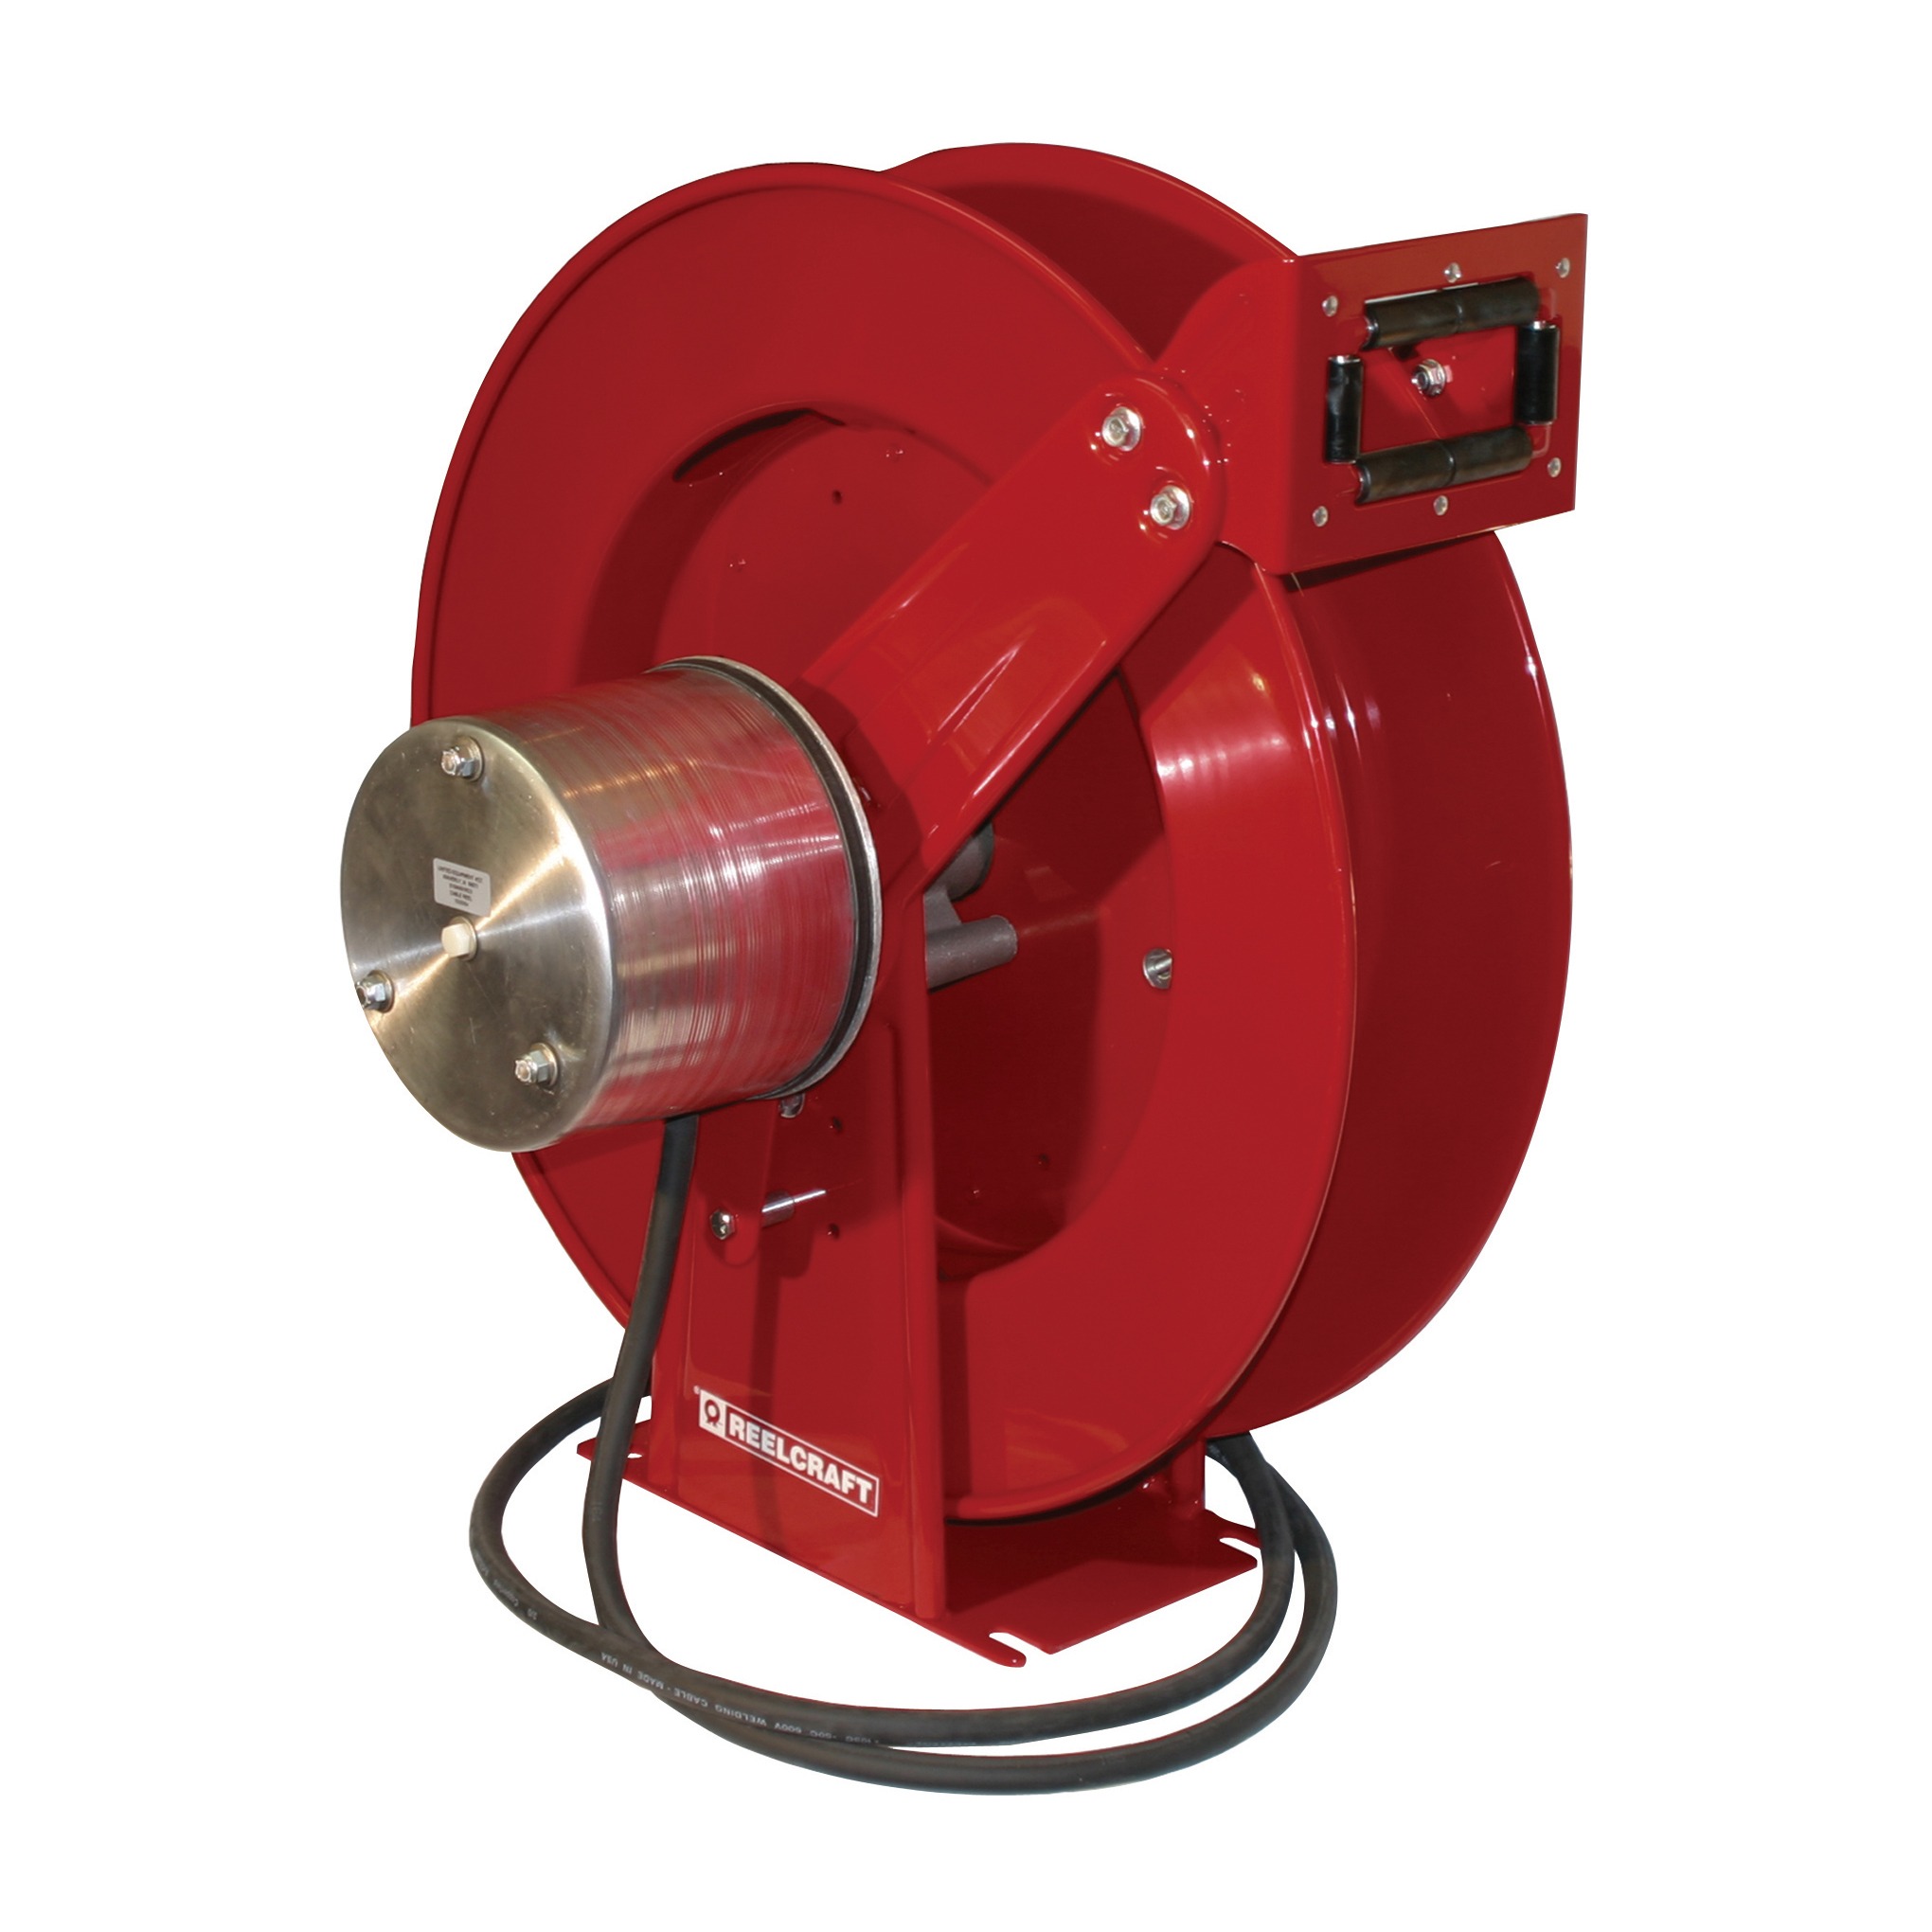 WCH80001 - Ultimate Duty 700 Amp Cable Welding Reel - Hose, Cord and Cable  Reels - Reelcraft